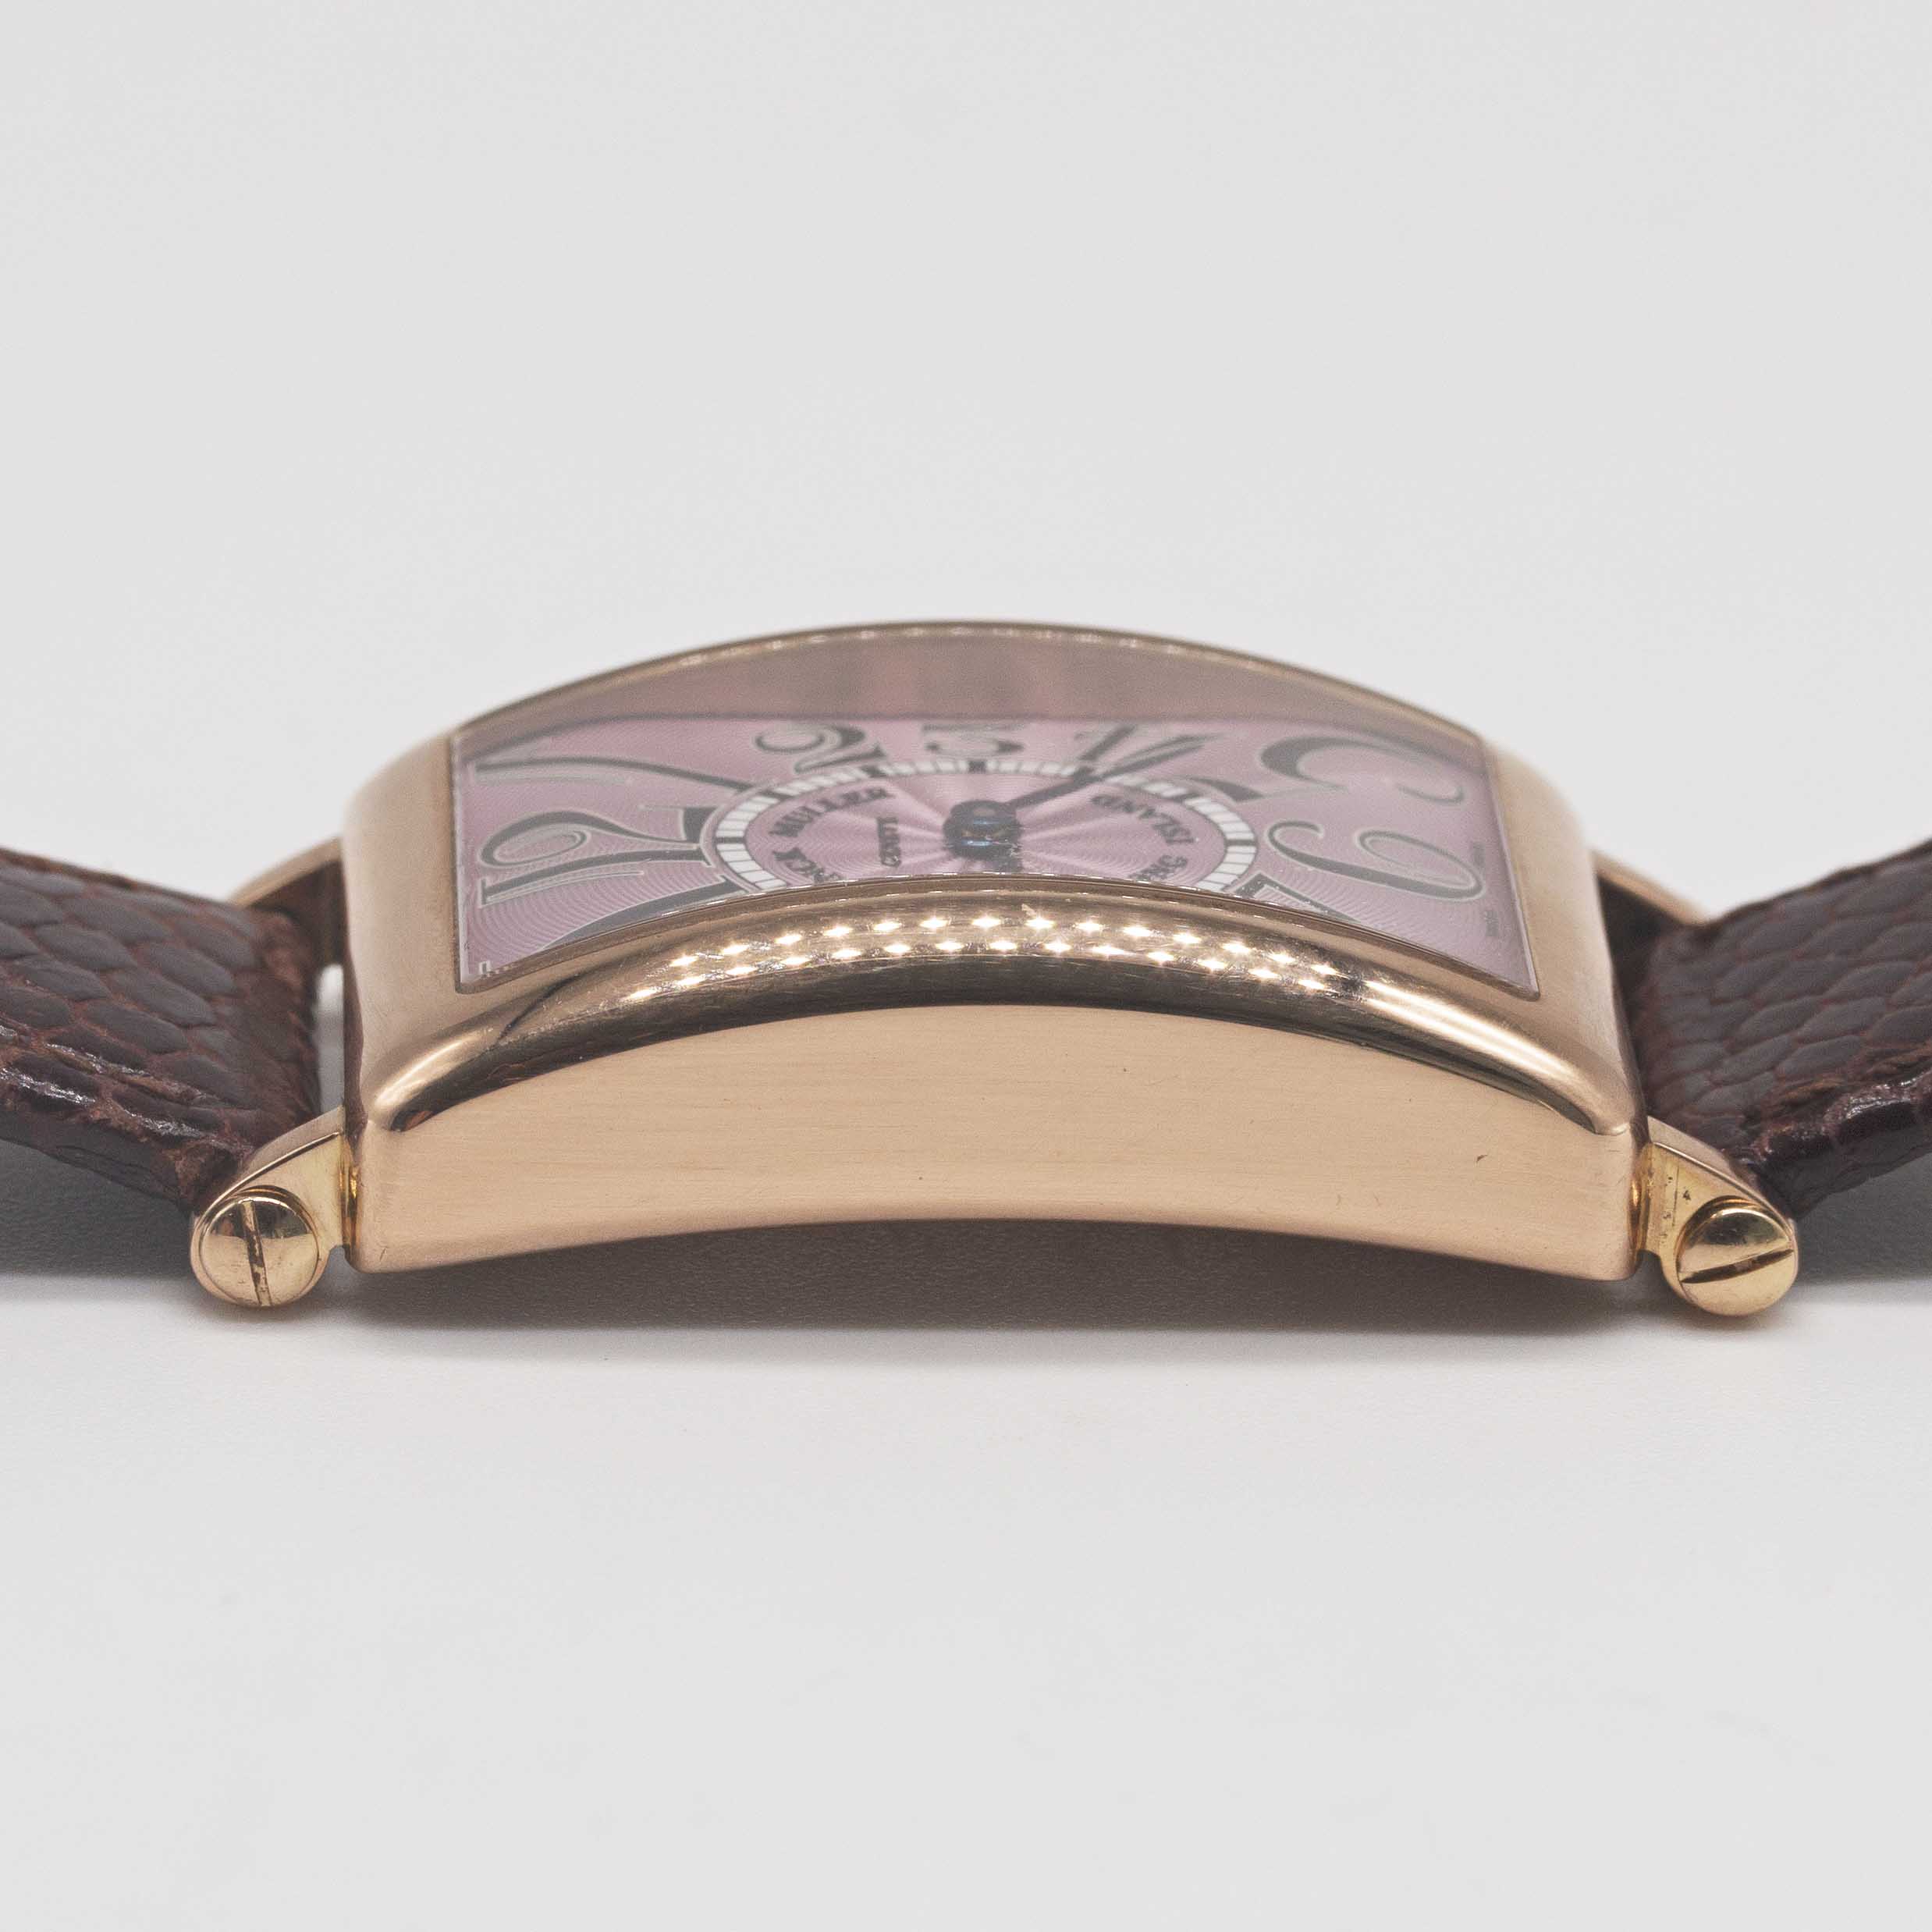 A LADIES 18K SOLID ROSE GOLD FRANCK MULLER LONG ISLAND WRIST WATCH CIRCA 2005, REF. 900 QZ WITH PINK - Image 7 of 7